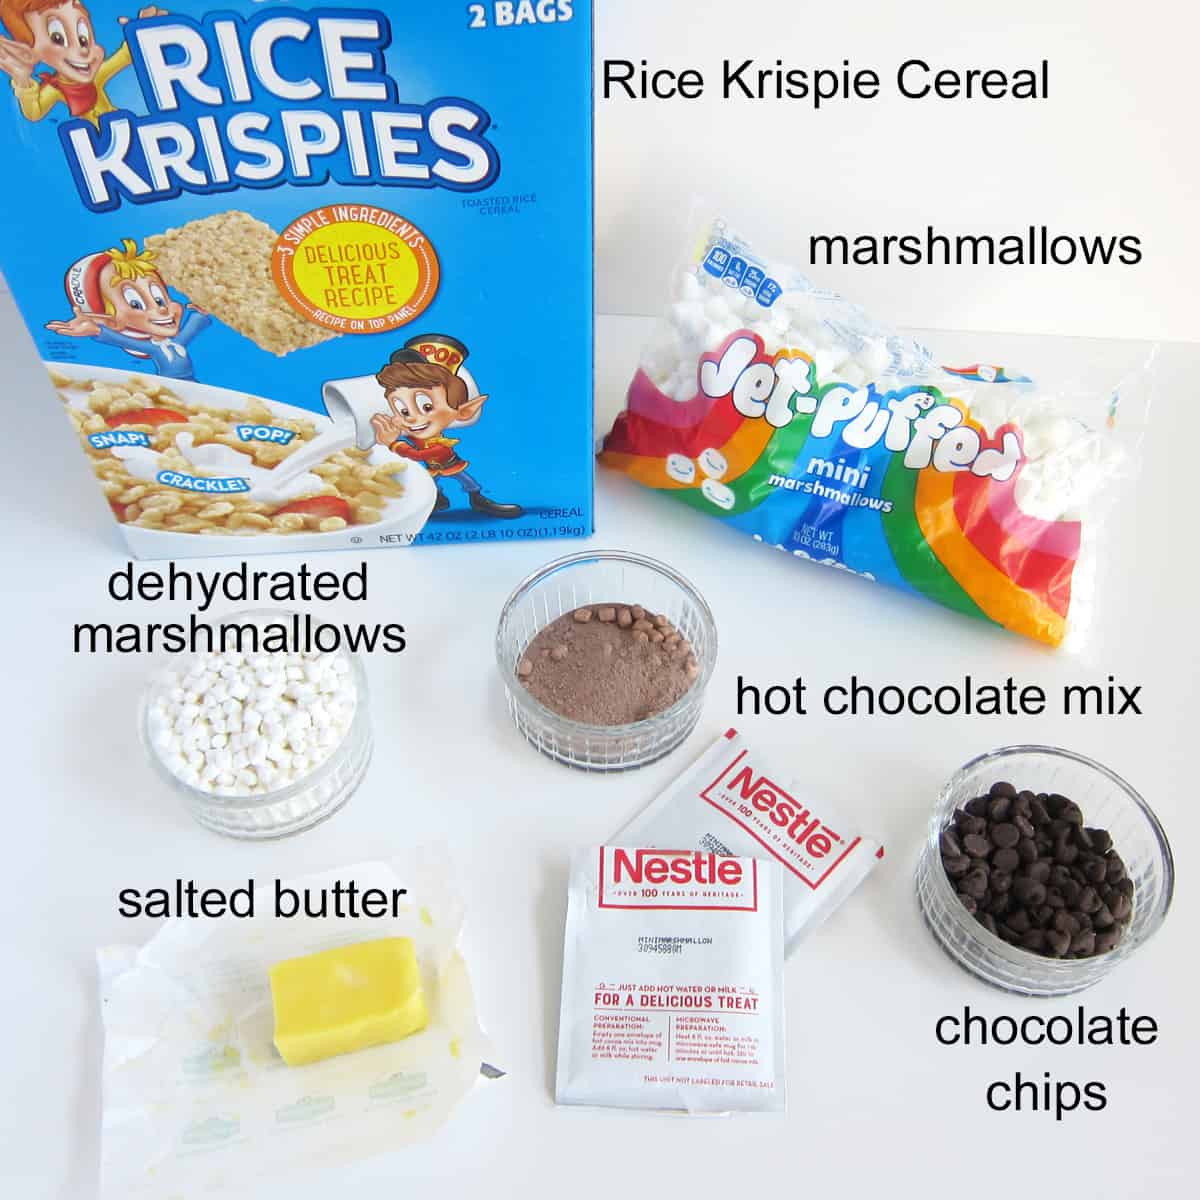 hot chocolate Rice Krispie treats recipe ingredients including Rice Krispies Cereal, marshmallows, hot cocoa mix, chocolate chips, salted butter, and dehydrated marshmallows.